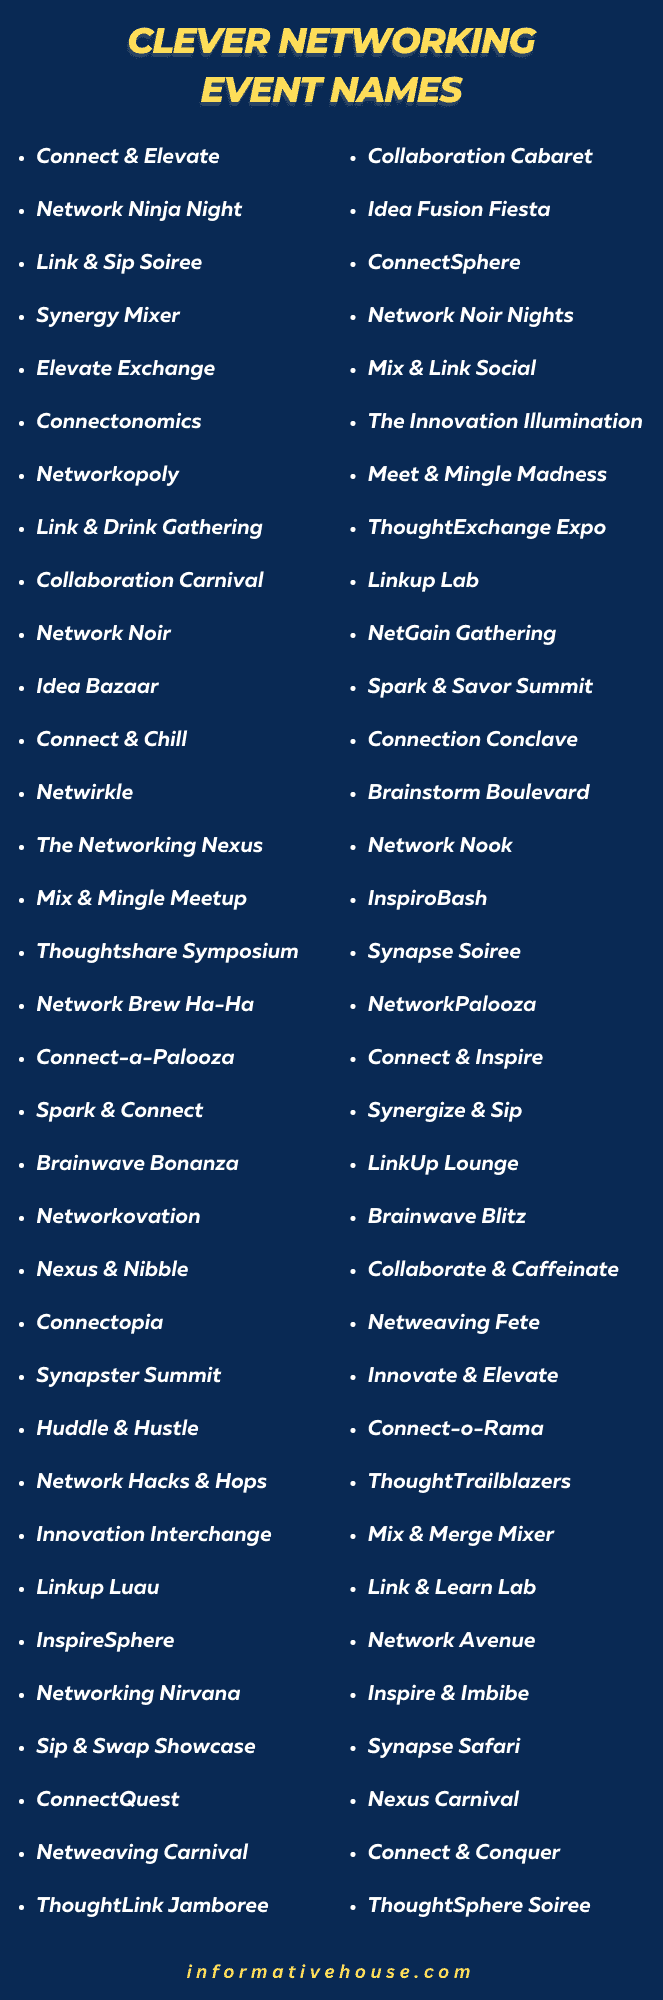 Clever Networking Event Names